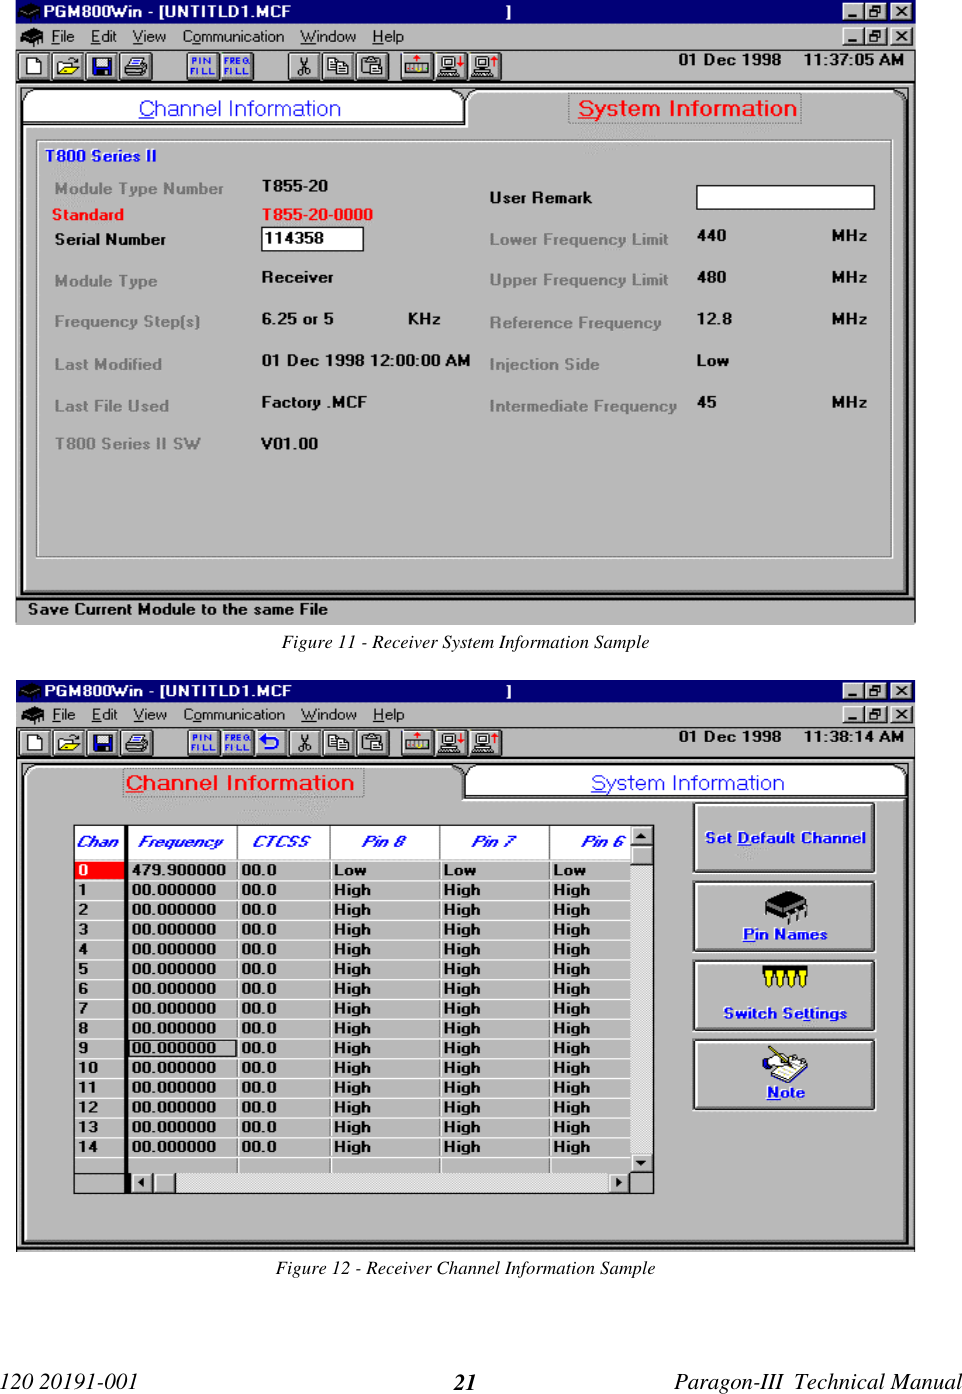 120 20191-001 Paragon-III  Technical Manual21Figure 11 - Receiver System Information SampleFigure 12 - Receiver Channel Information Sample